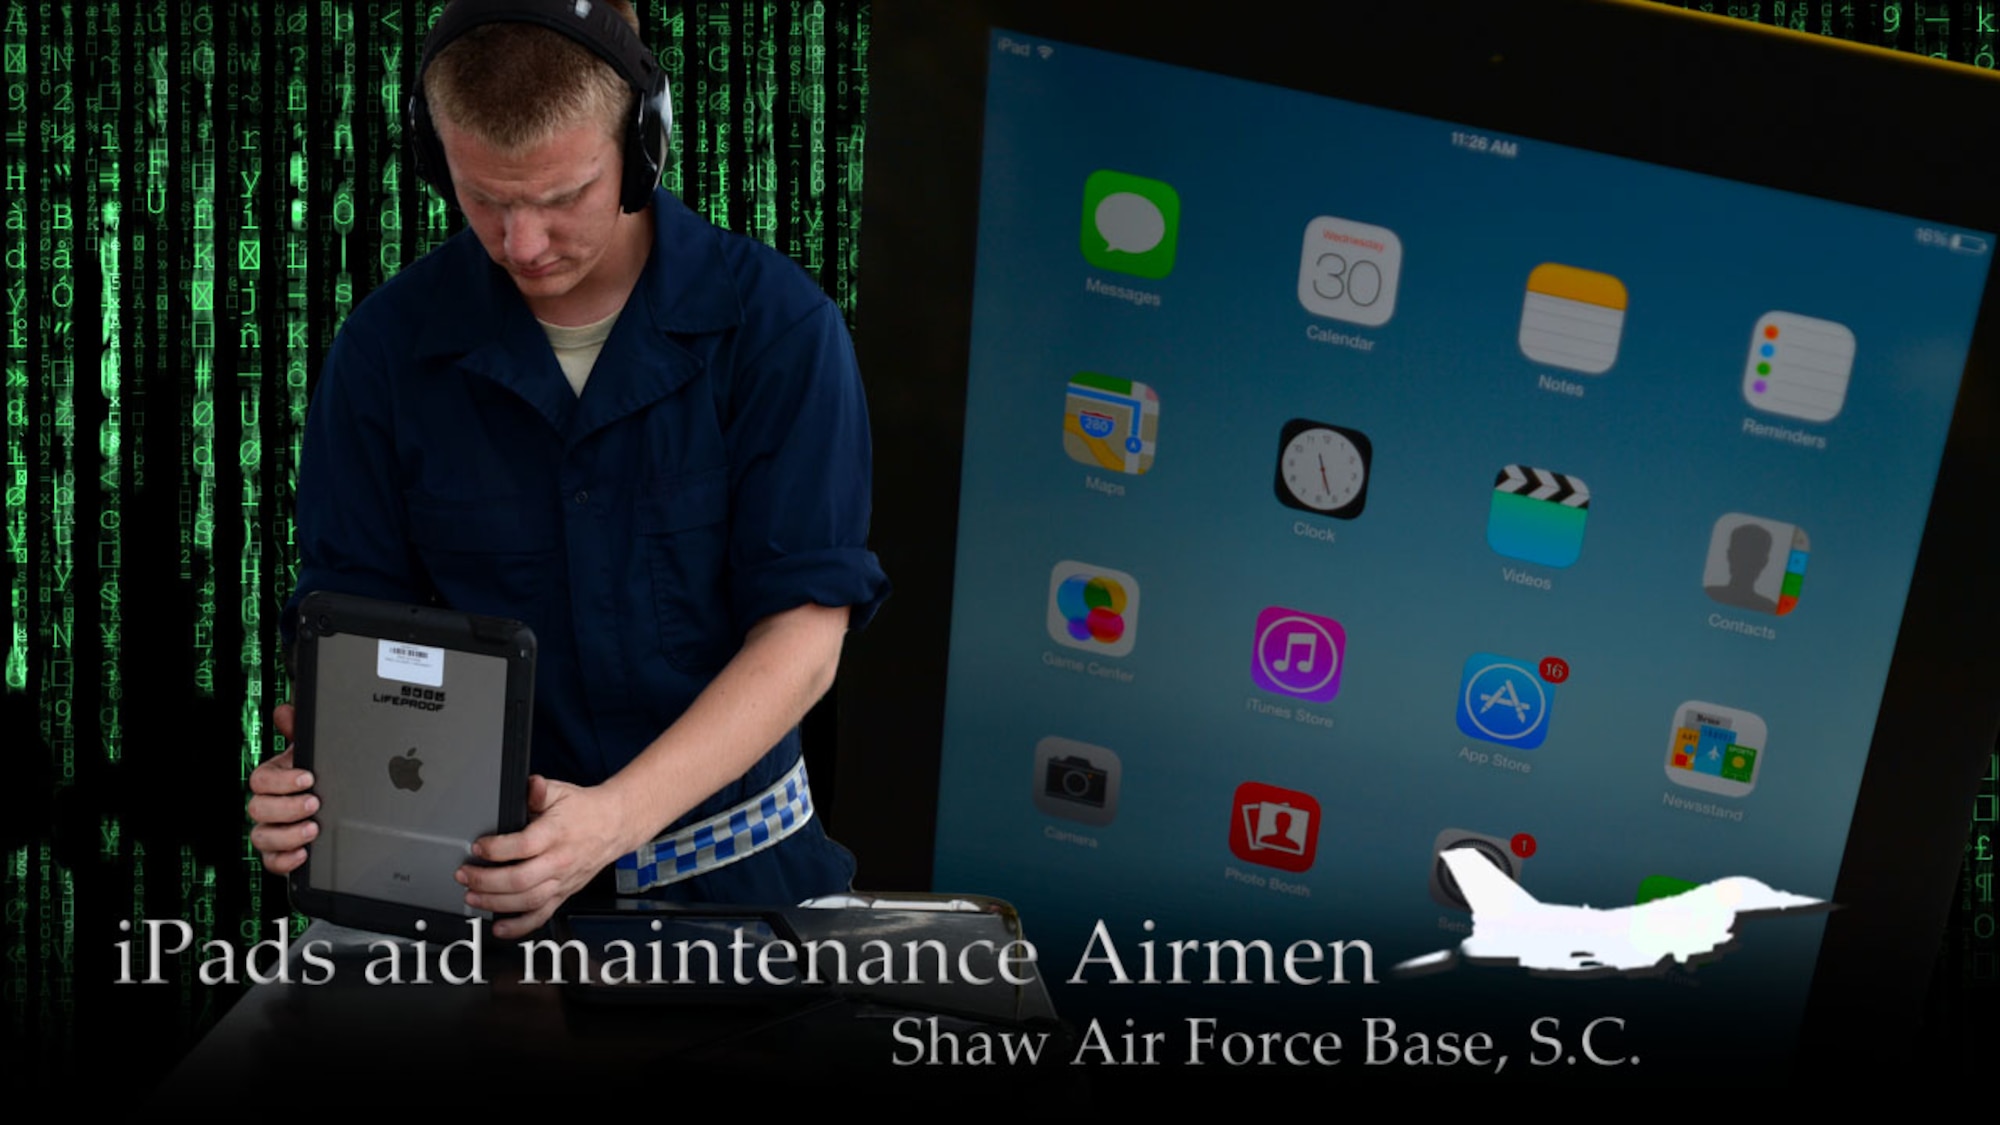 Airmen assigned to the 20th Maintenance Group began testing Apple iPads in place of Technical Order manuals at Shaw Air Force Base, S.C., April 28, 2014. (U.S. Air Force photo illustration by Airman 1st Class Jensen Stidham/Released)